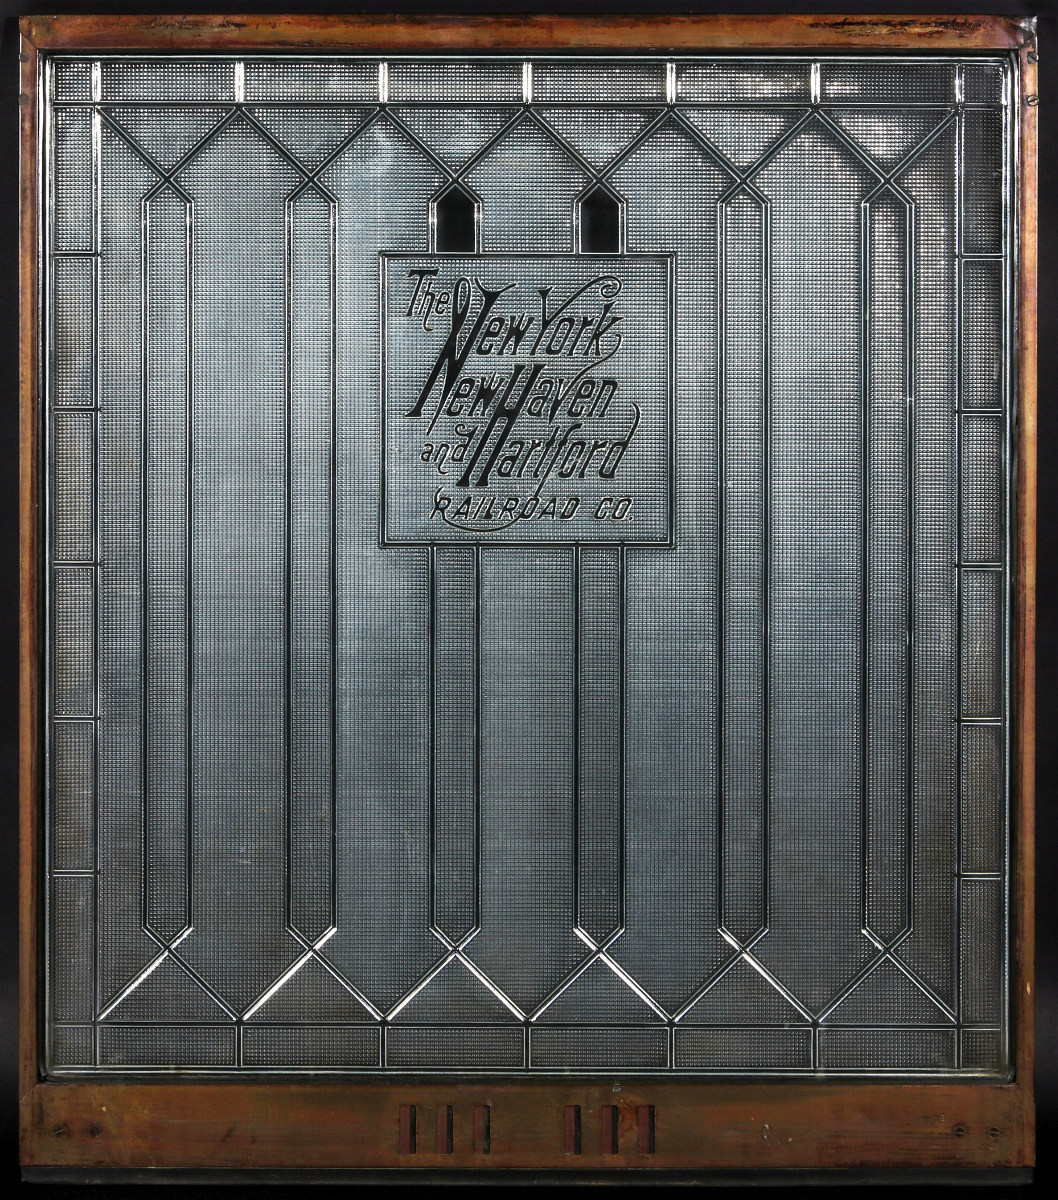 A PULLMAN WINDOW PANEL FOR NEW HAVEN RAILROAD